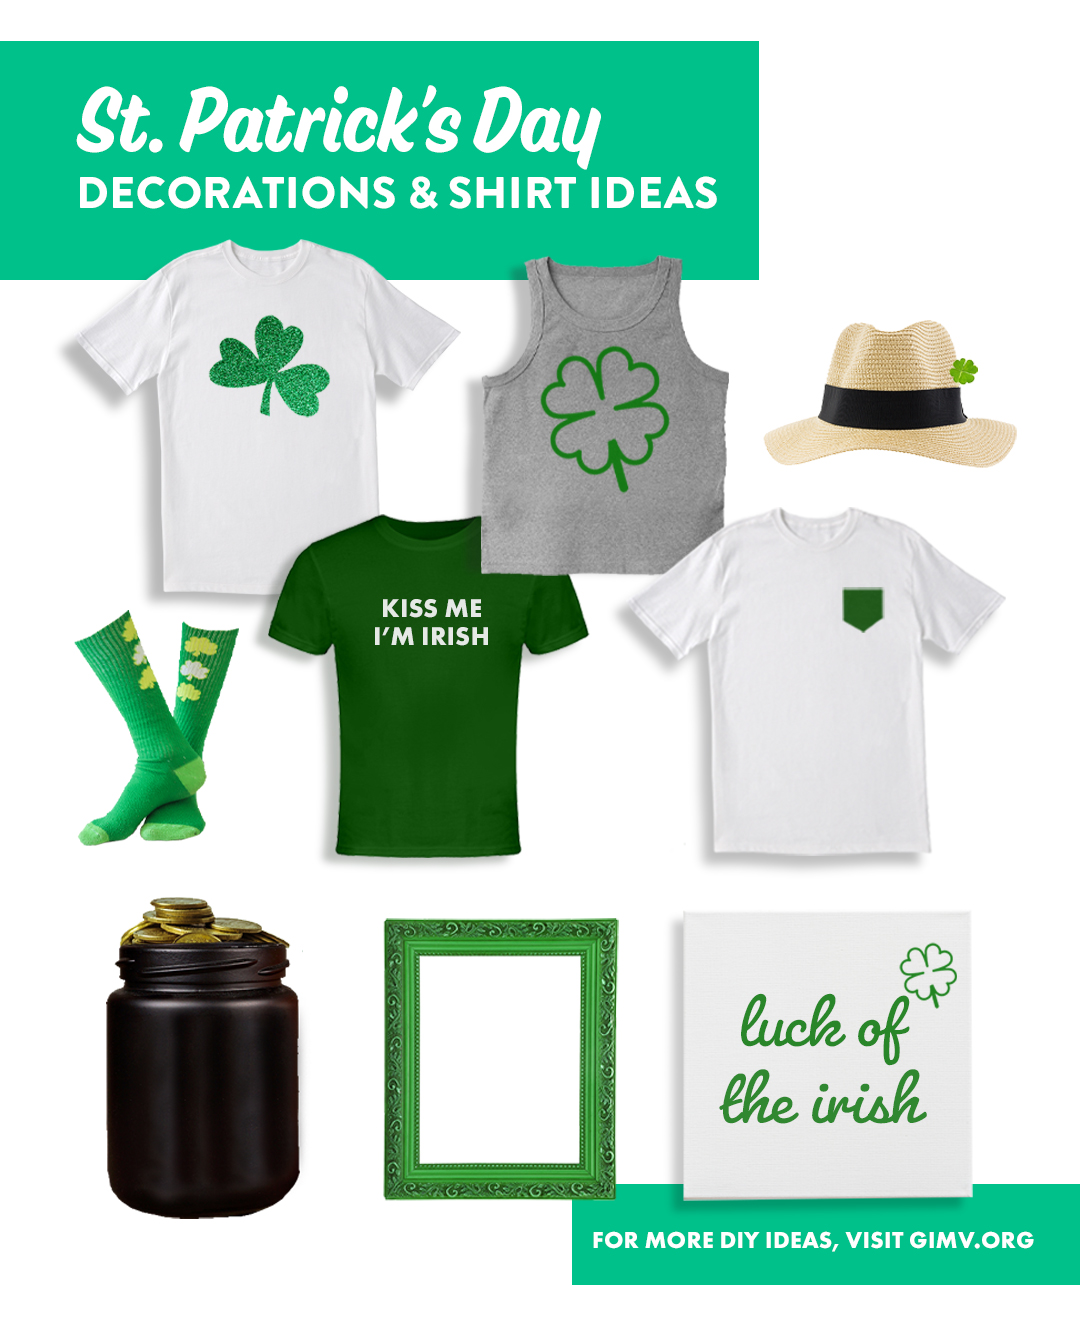 st. patricks day decorations and shirt ideas style board graphic